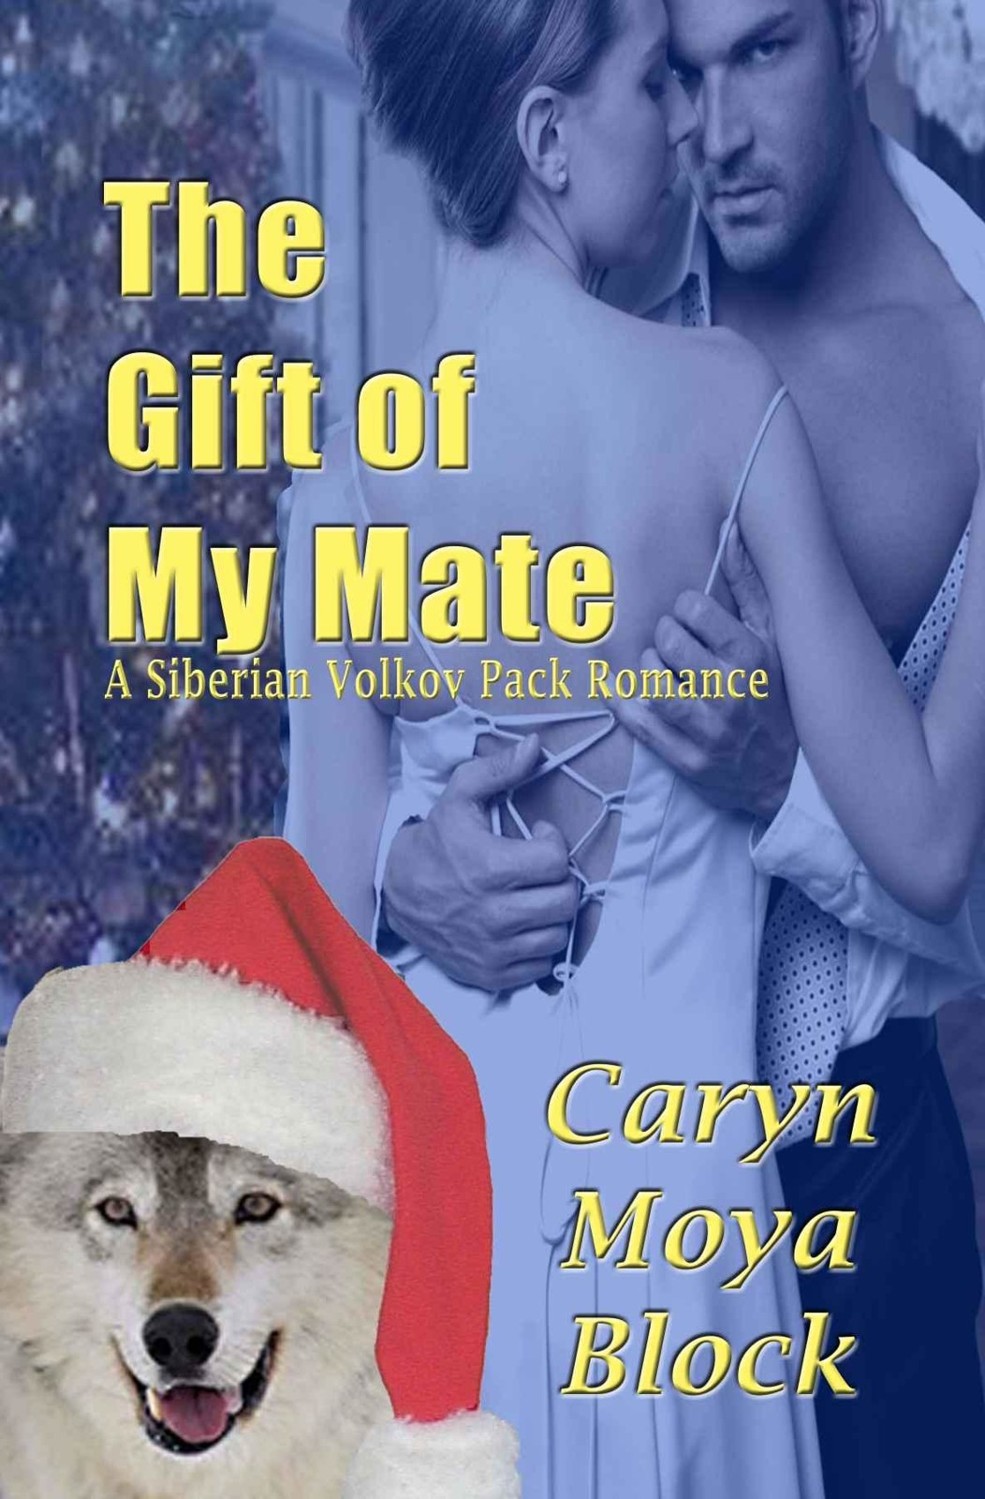 The Gift of My Mate (Siberian Volkov Pack Romance Book 9)